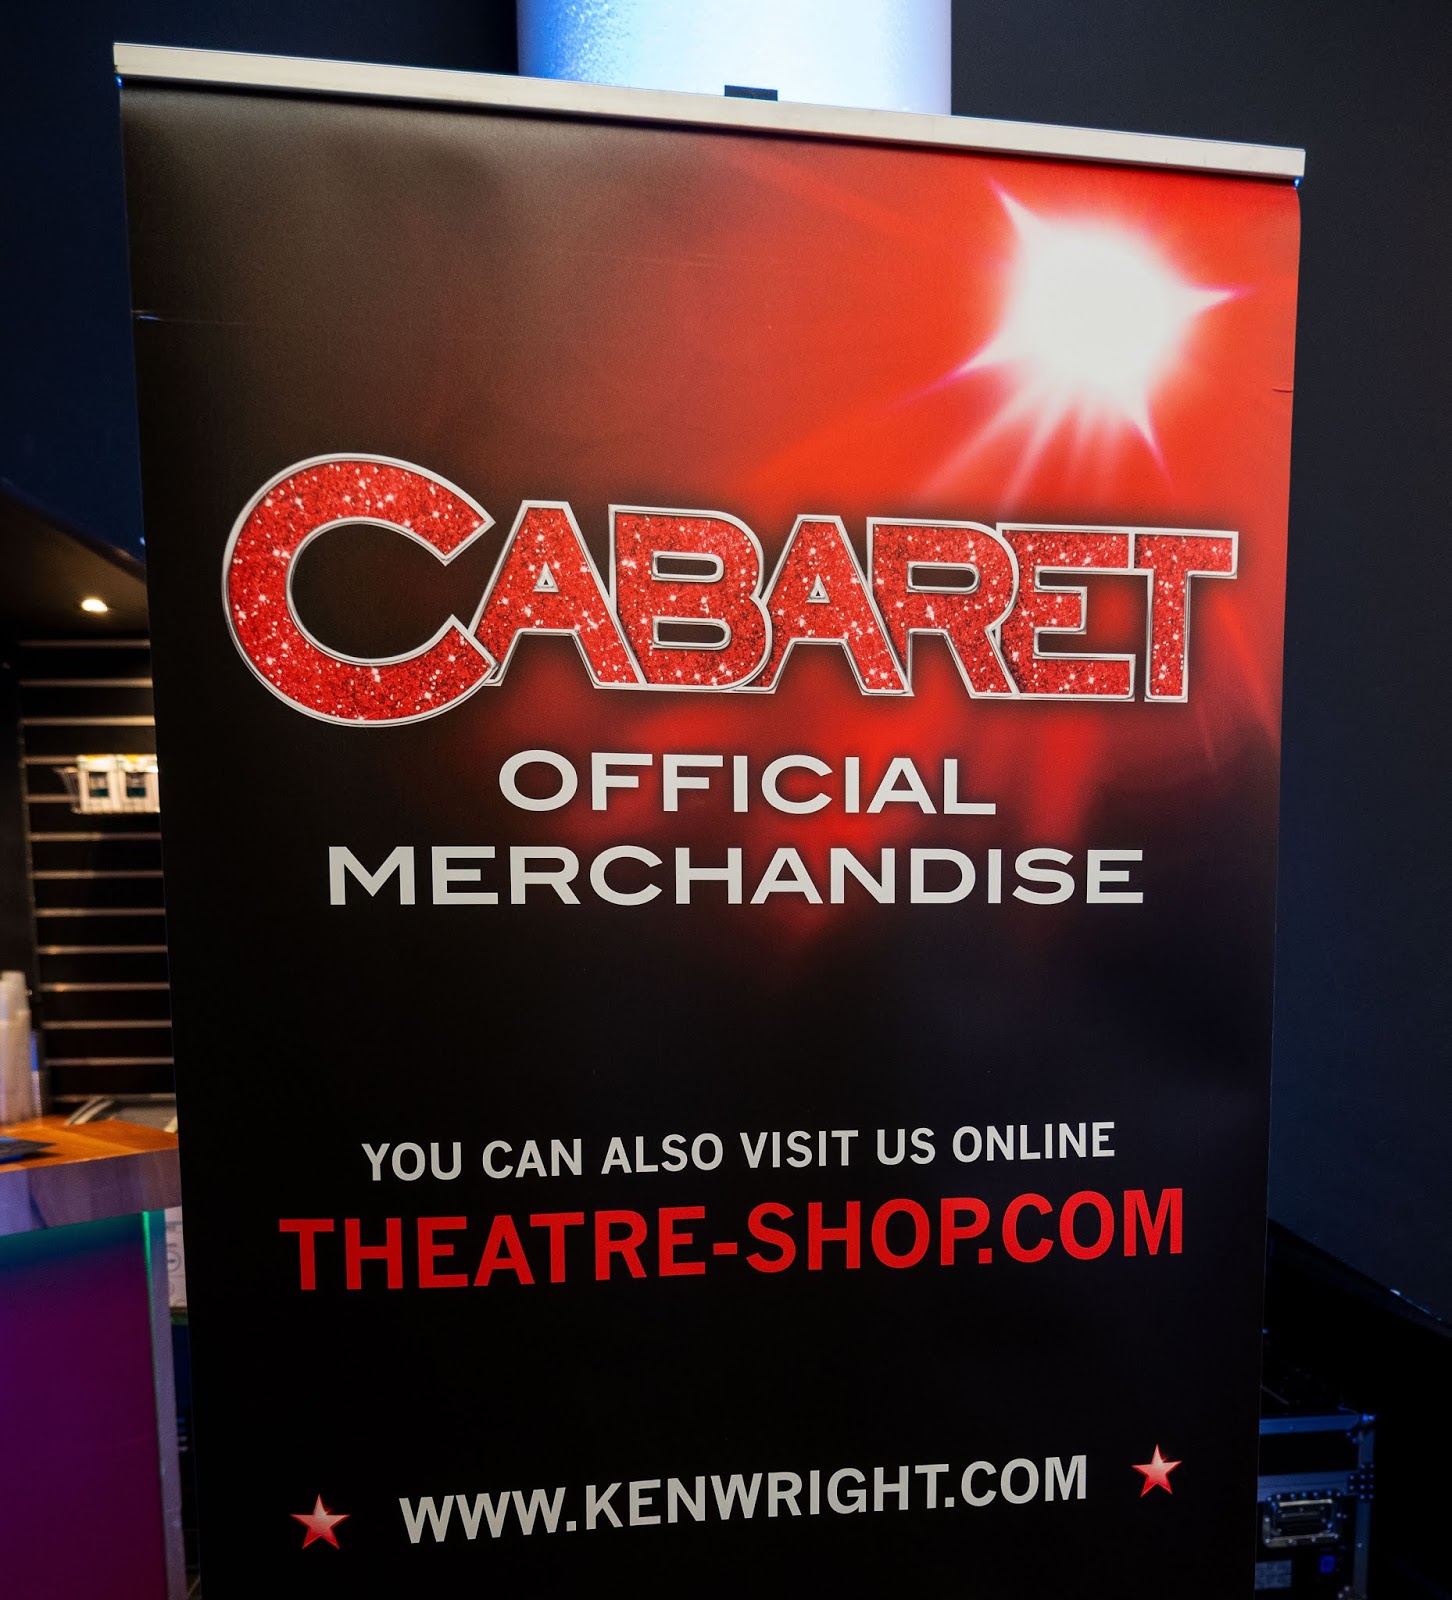 Cabaret banner in The Marlowe Theatre lobby